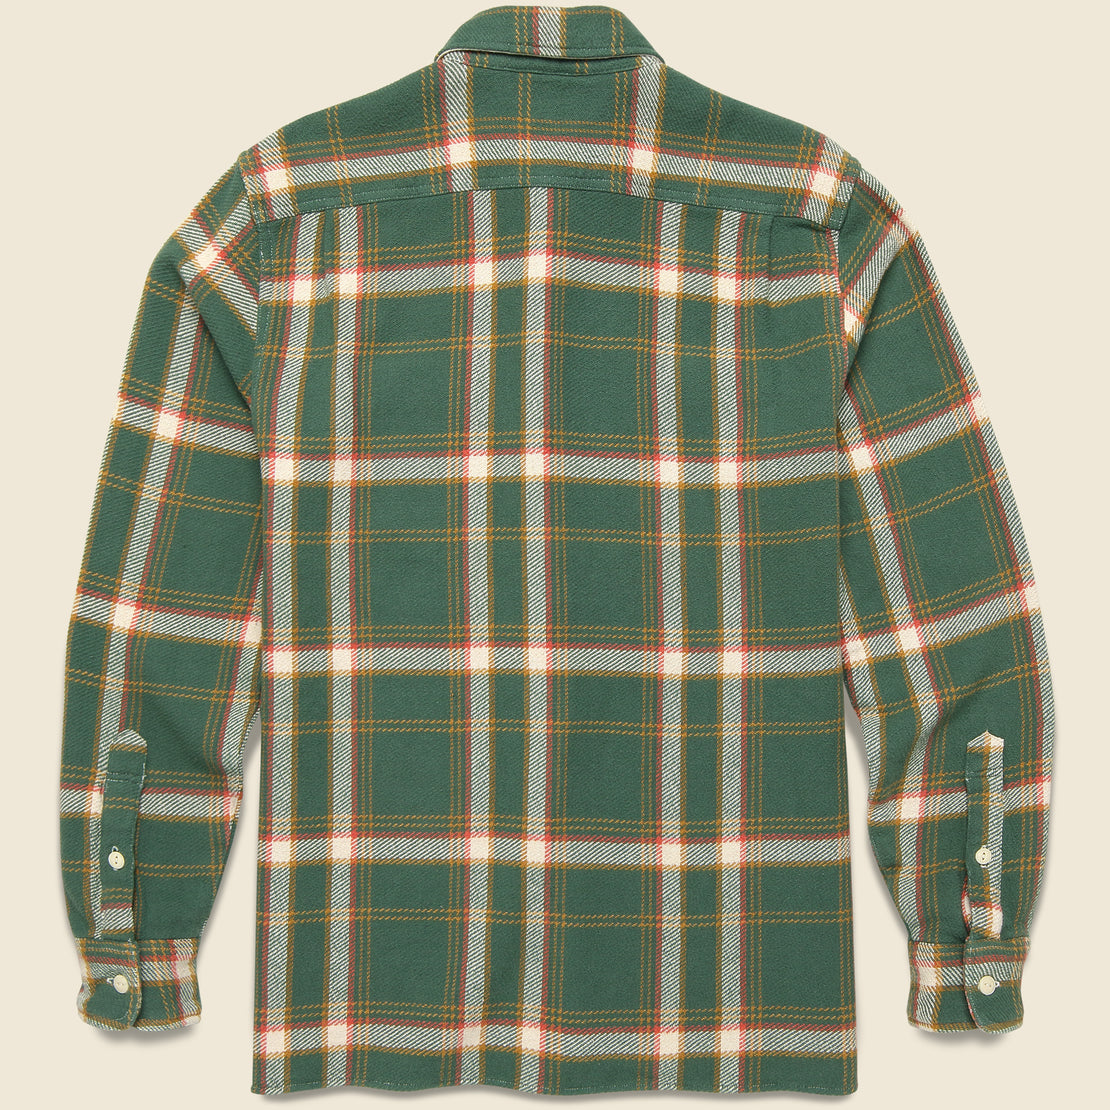 Surf Flannel - Cedar Valley Plaid - Faherty - STAG Provisions - Tops - L/S Woven - Plaid